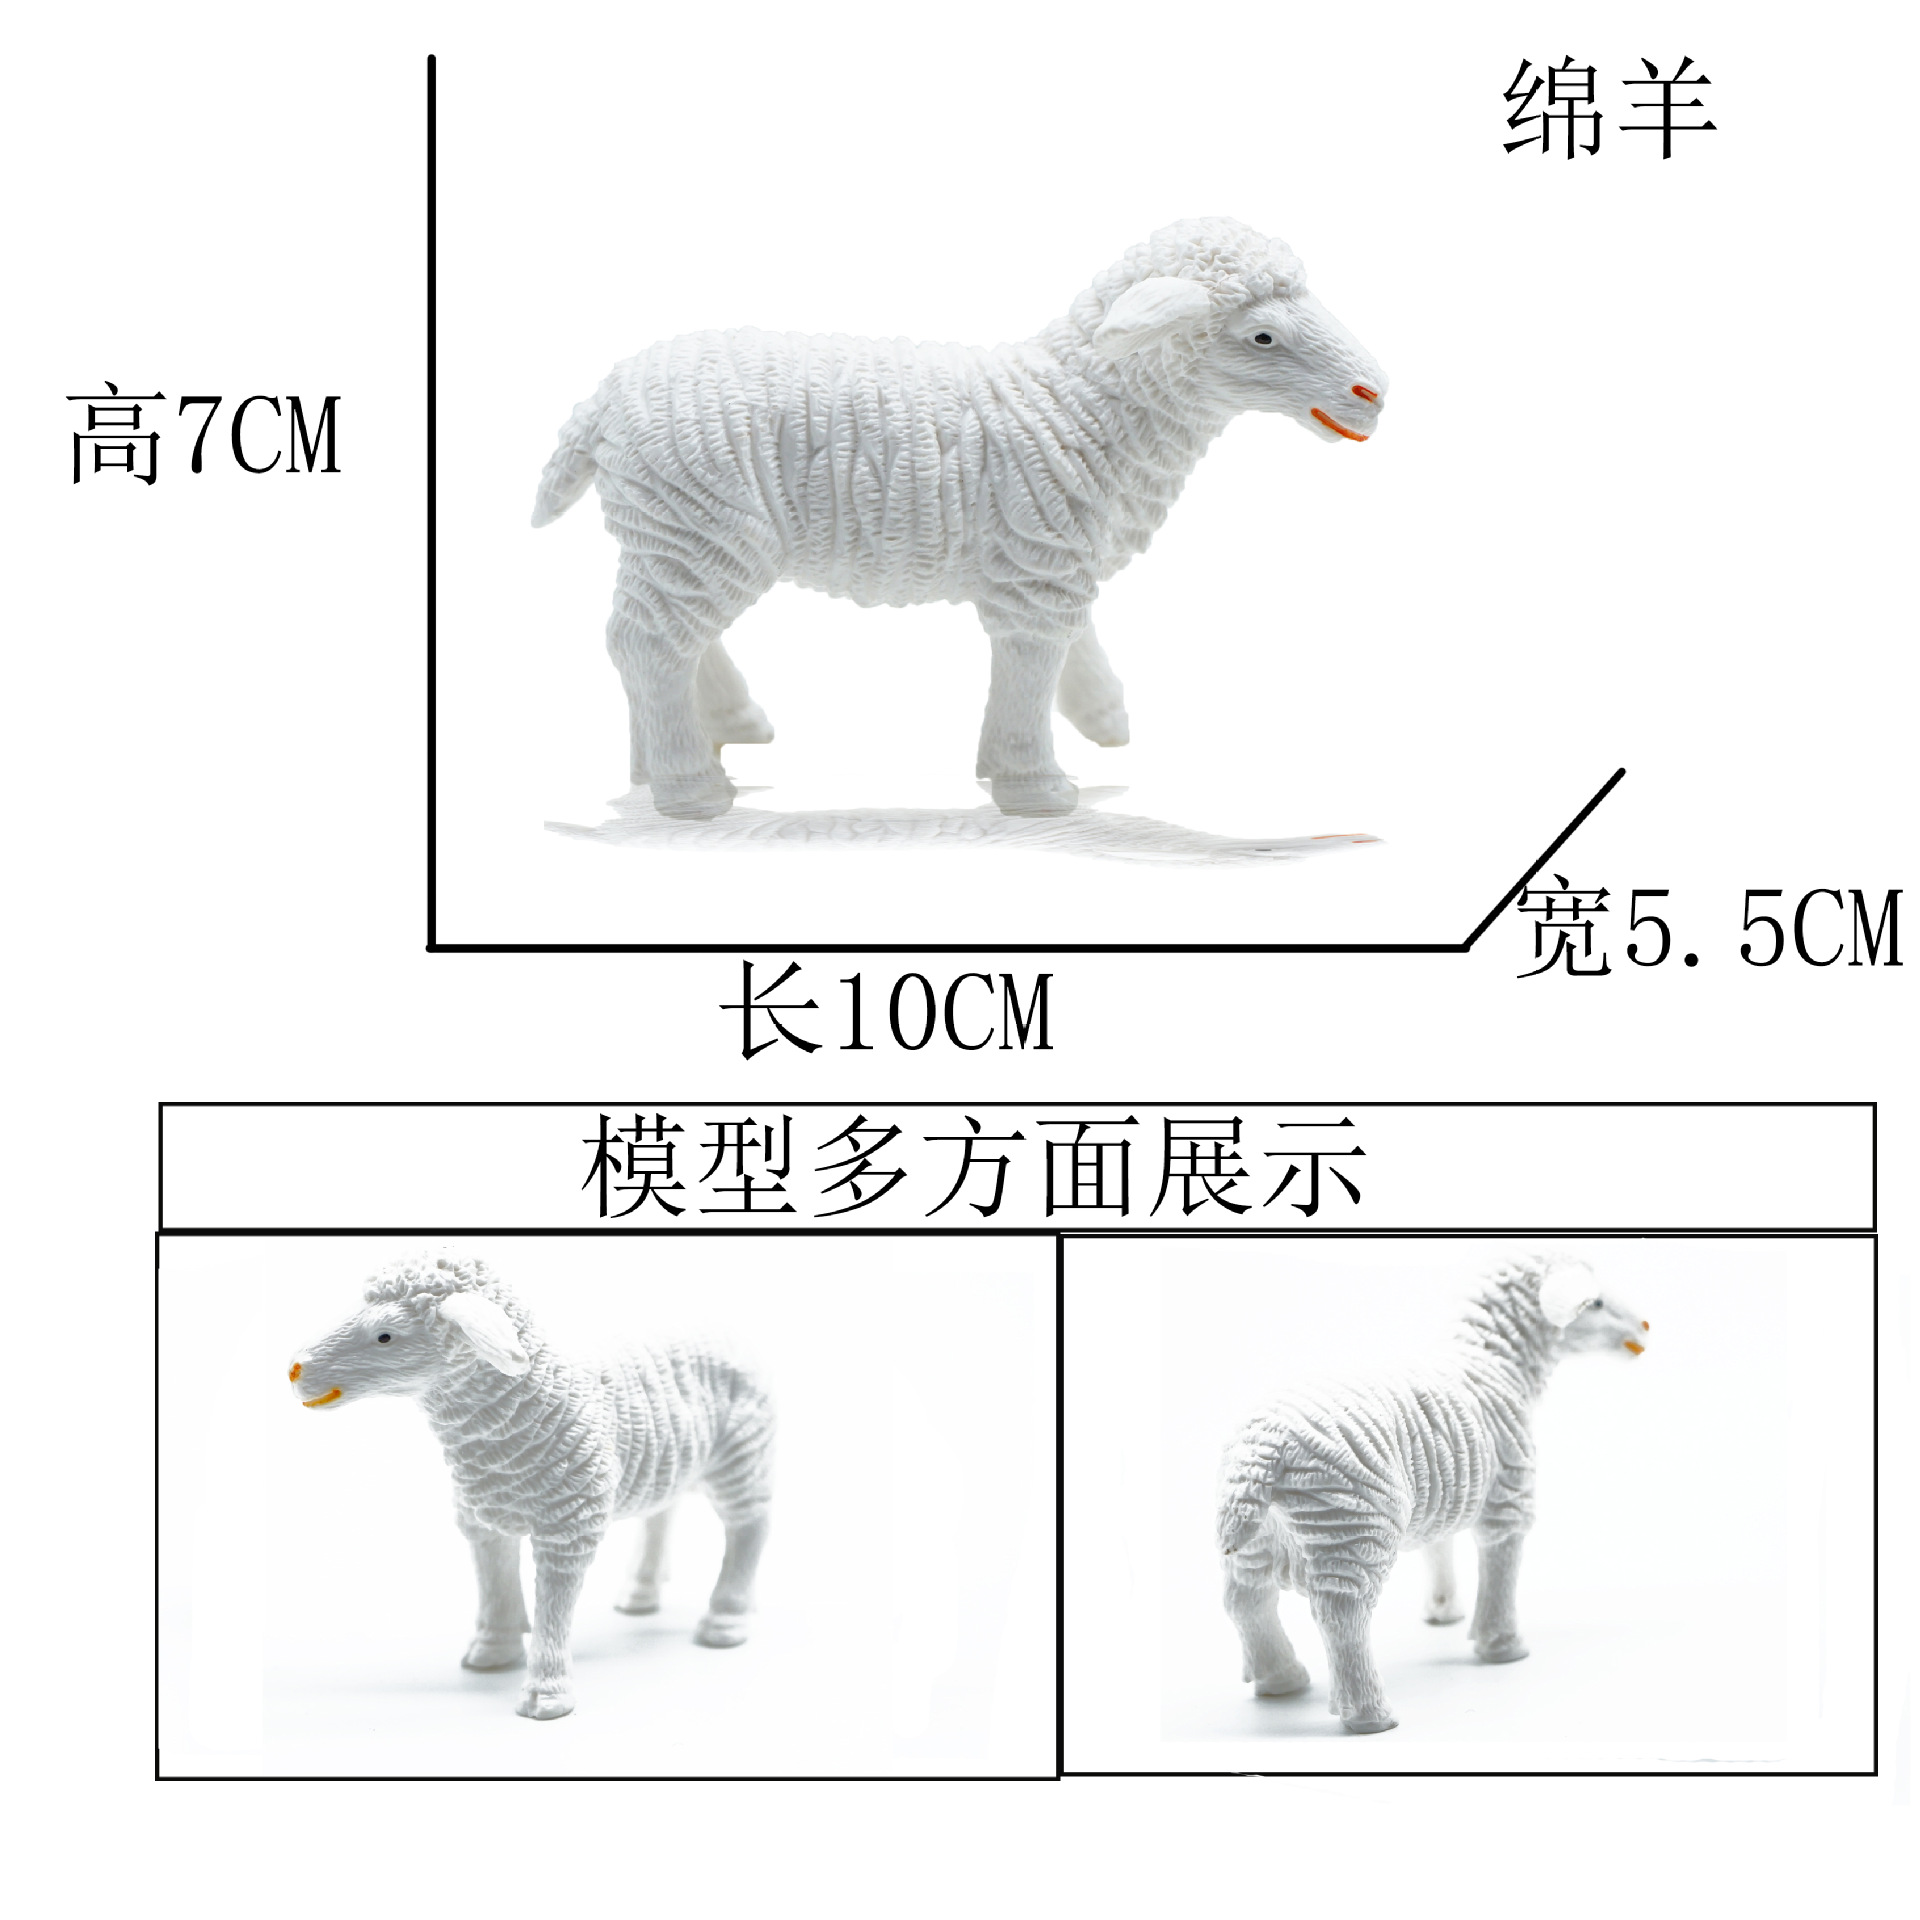 Simulation Animal Model Poultry Wildlife Park Toy Decoration Baby Early Education Serious Cow Pig Horse Golden Retriever